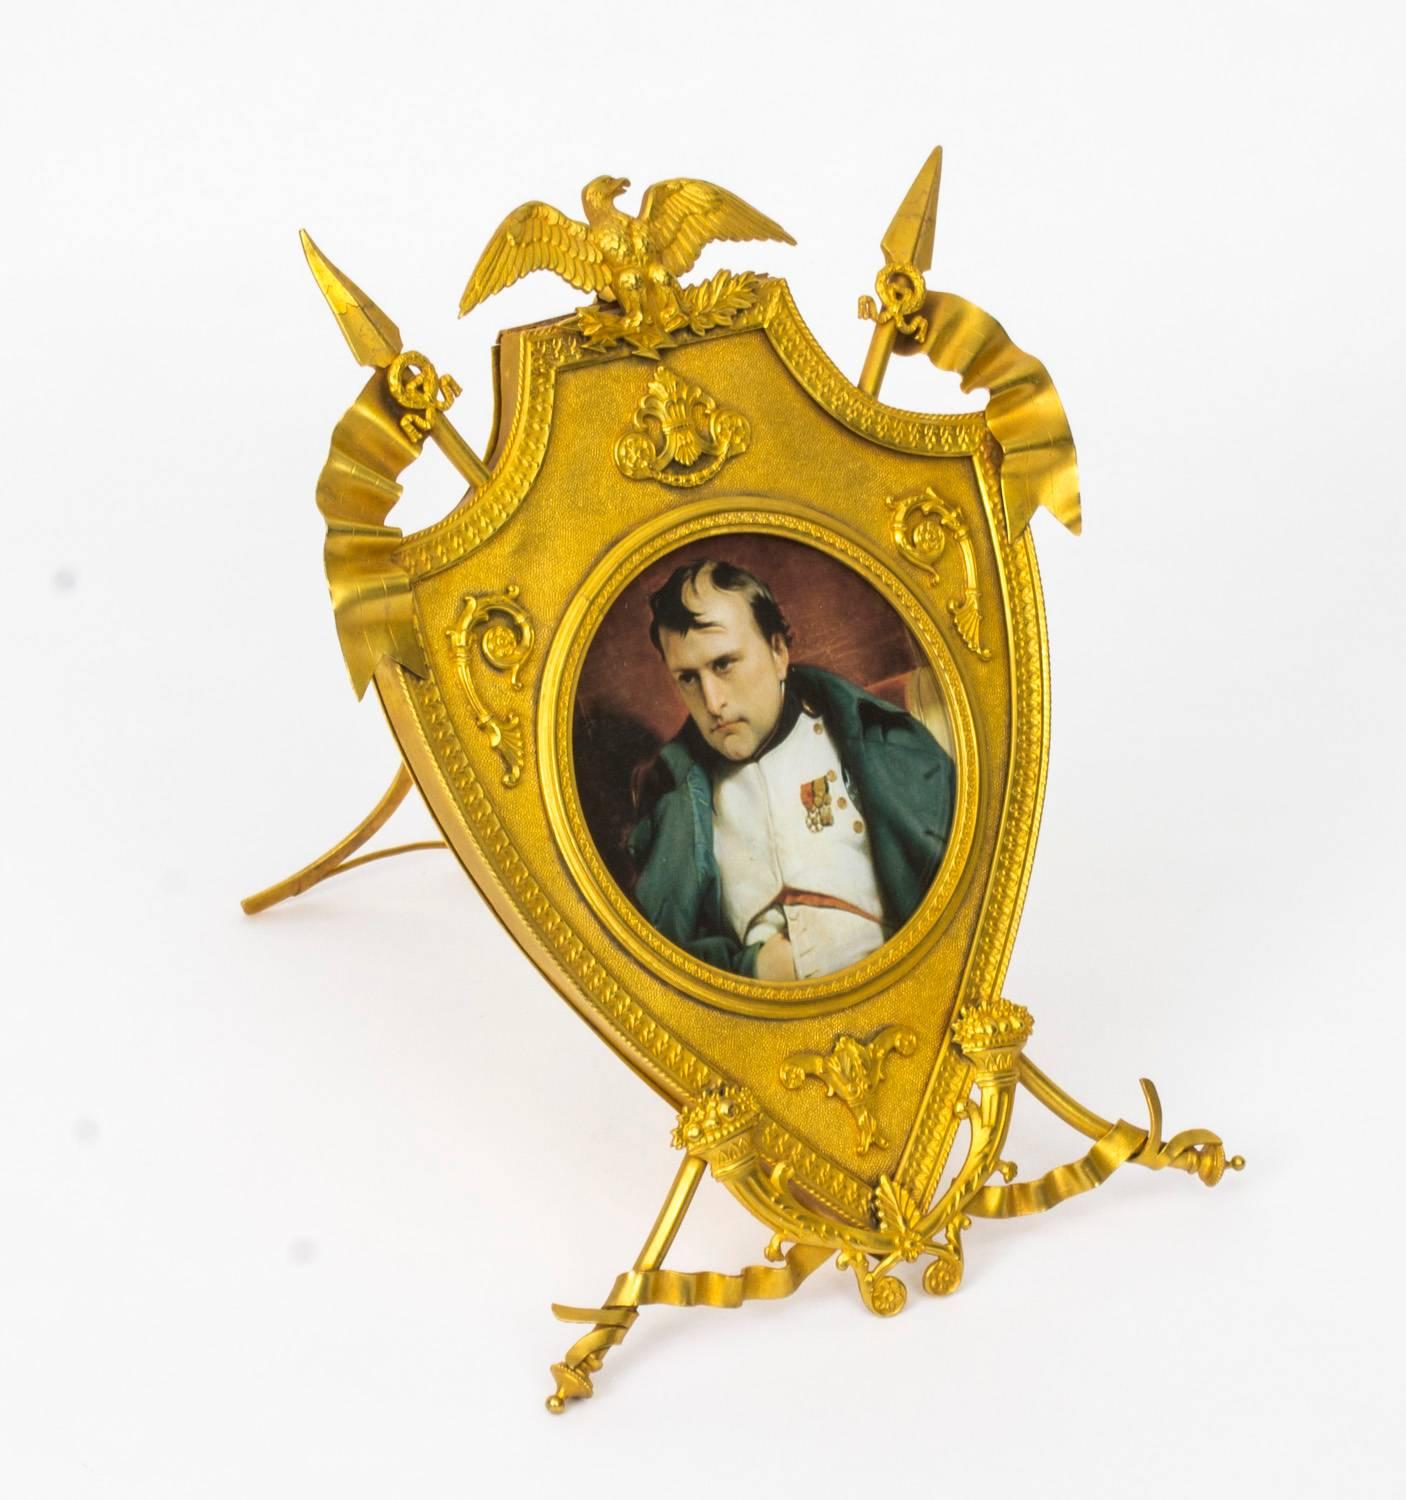 This is a lovely antique French Empire Revival gilt bronze picture frame, circa 1880 in date. 

The shield shaped frame features a spread eagle crest with military flags and laurel wreaths on either side. The ribbon wrapped Stand is joined by a